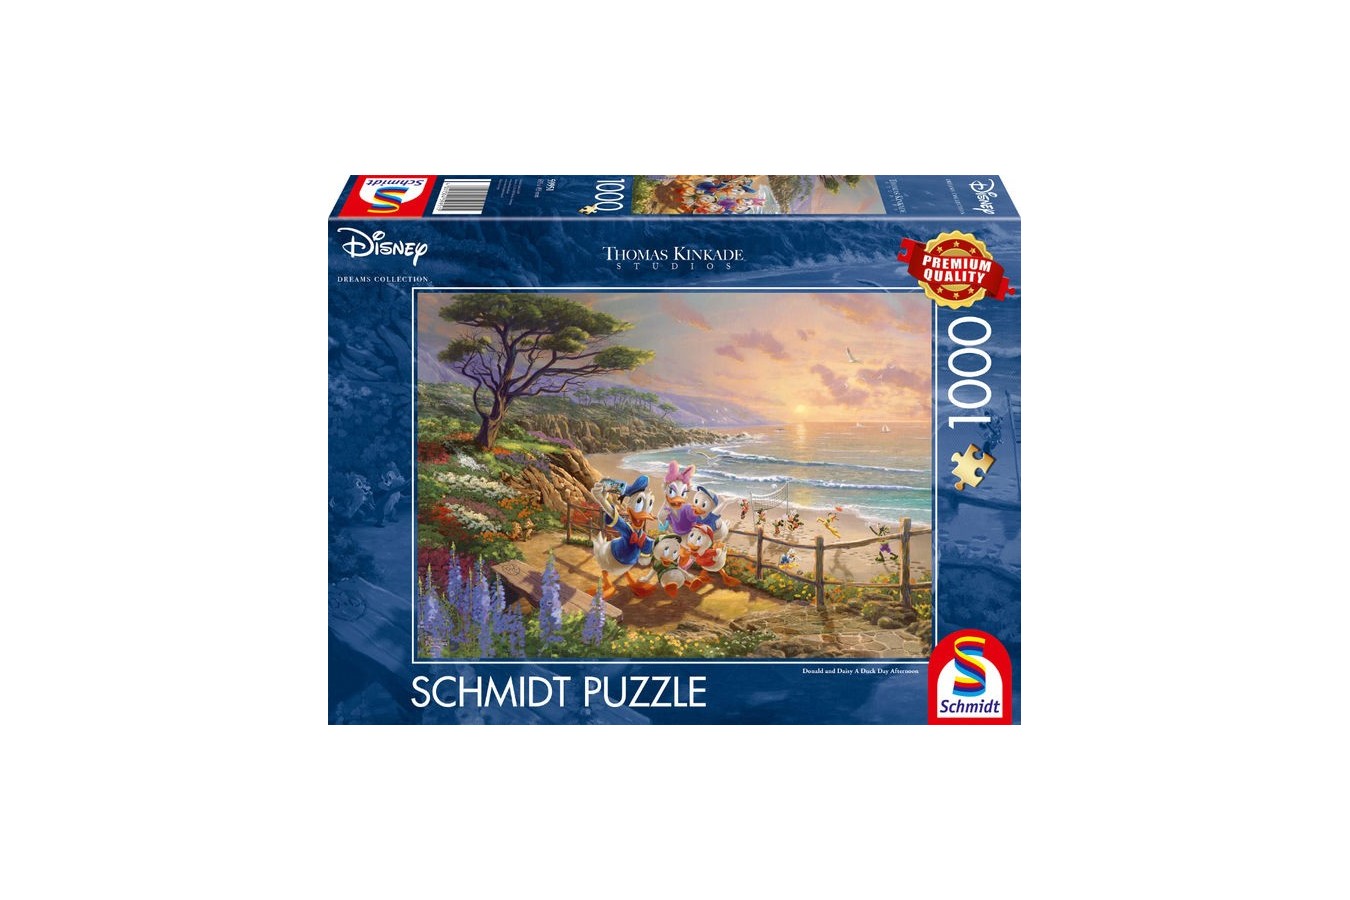 Puzzle 1000 piese - Thomas Kinkade: Donald and Daisy - A Duck Day Afternoon (Schmidt-59951)